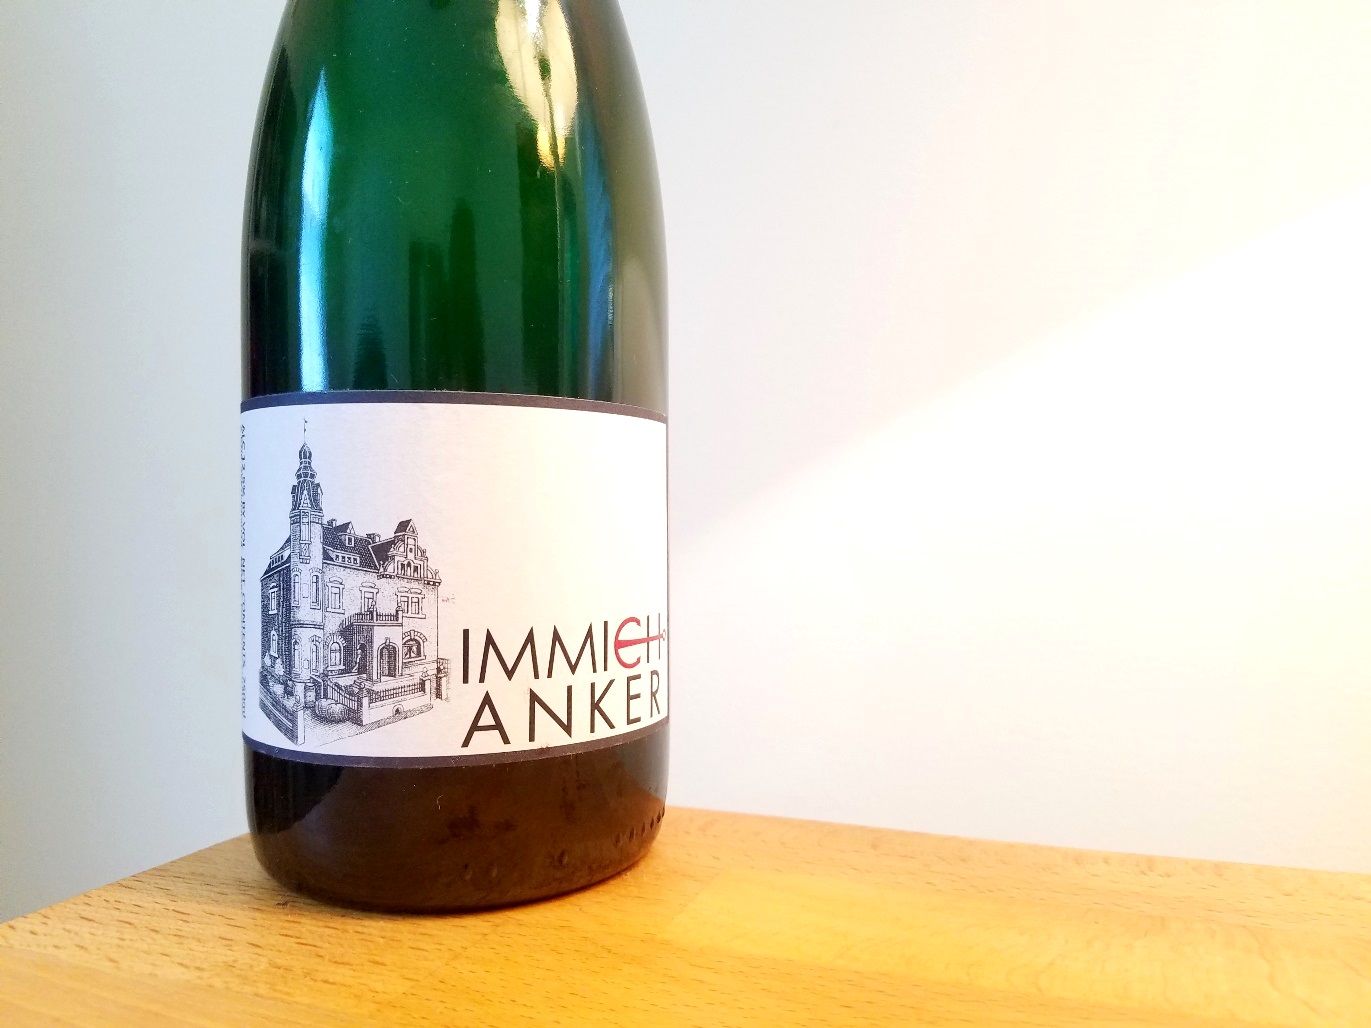 Immich-Anker, Enkircher Zeppwingert Riesling Brut 2014, Mosel, Riesling, Germany, Wine Casual